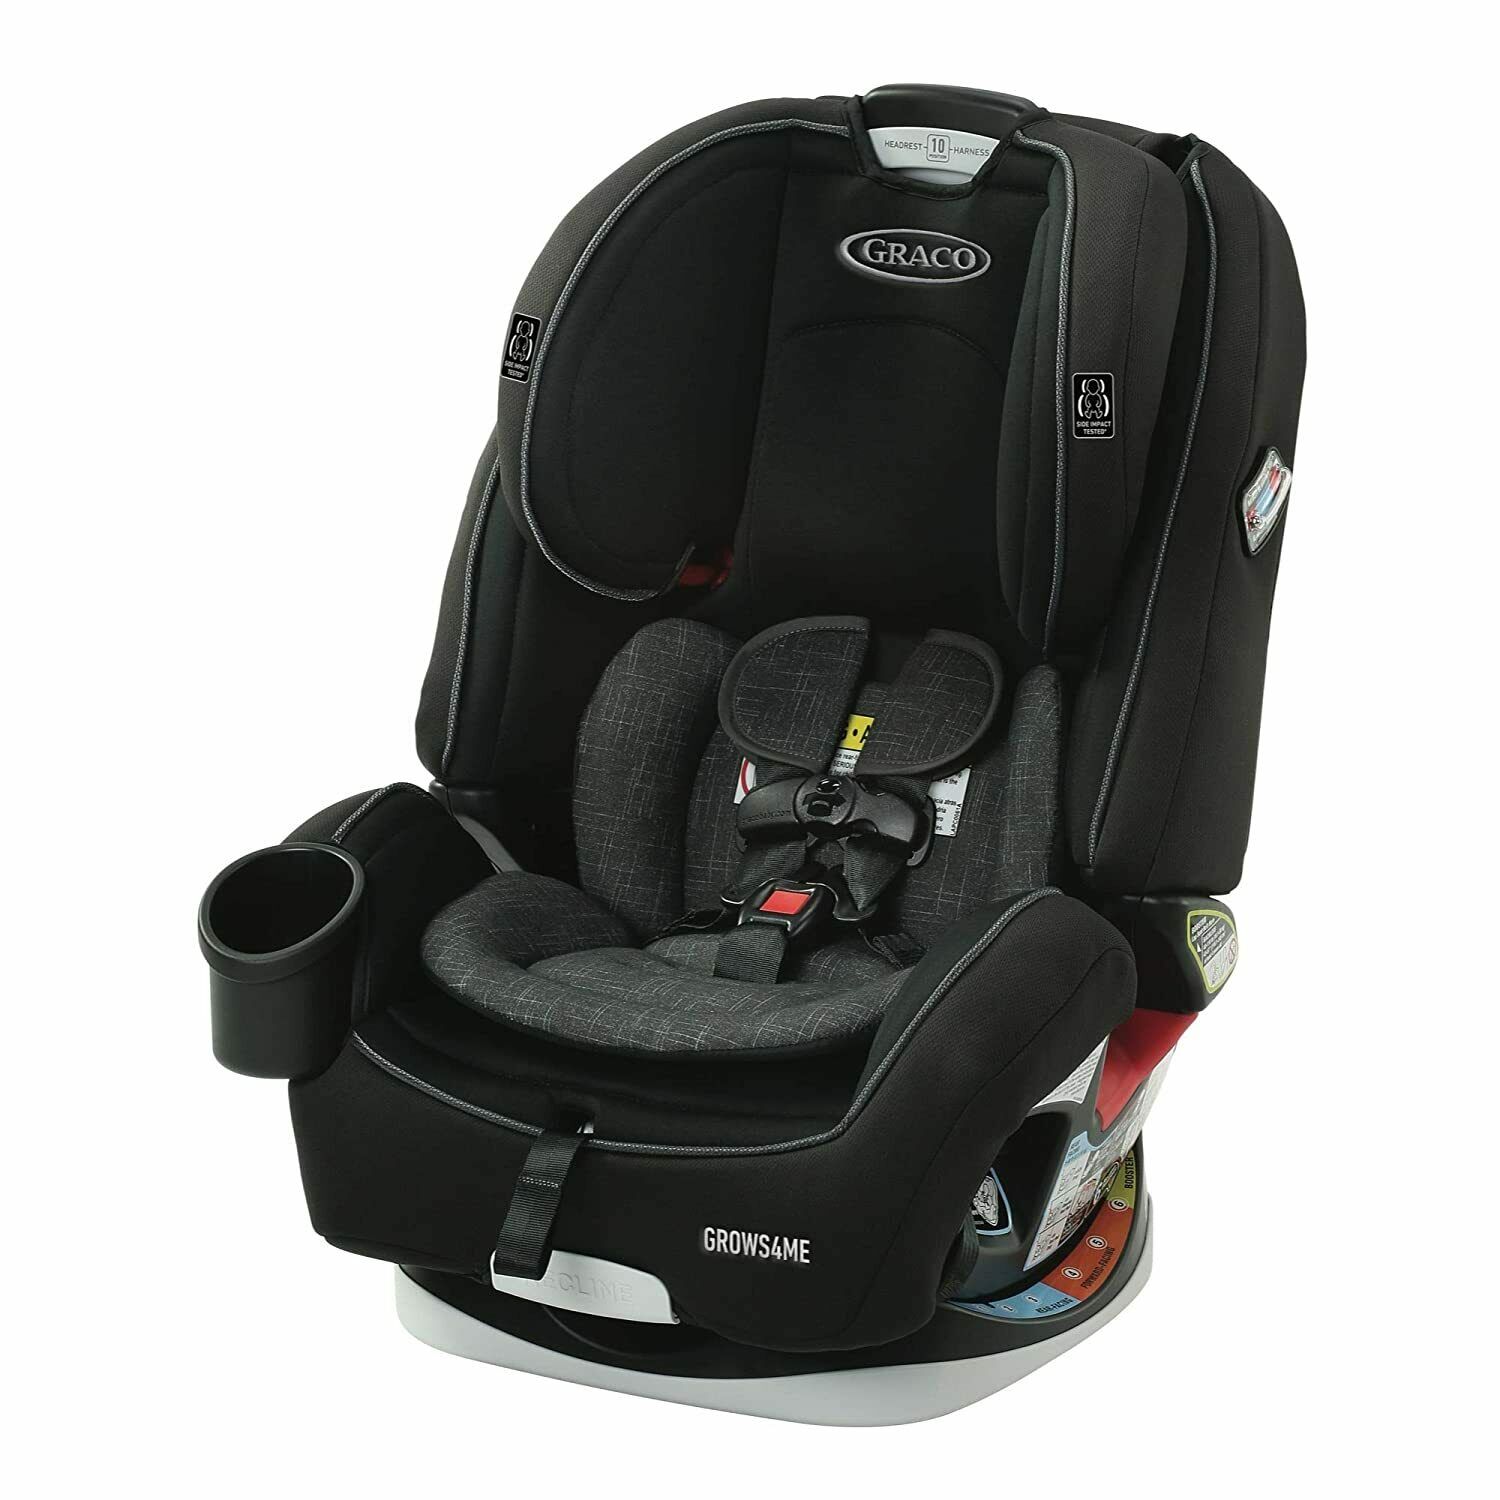 *NEW IN FACTORY BOX* Graco Grows4Me 4-in-1 CAR BOOSTER SEAT WESTPOINT BLACK GRAY